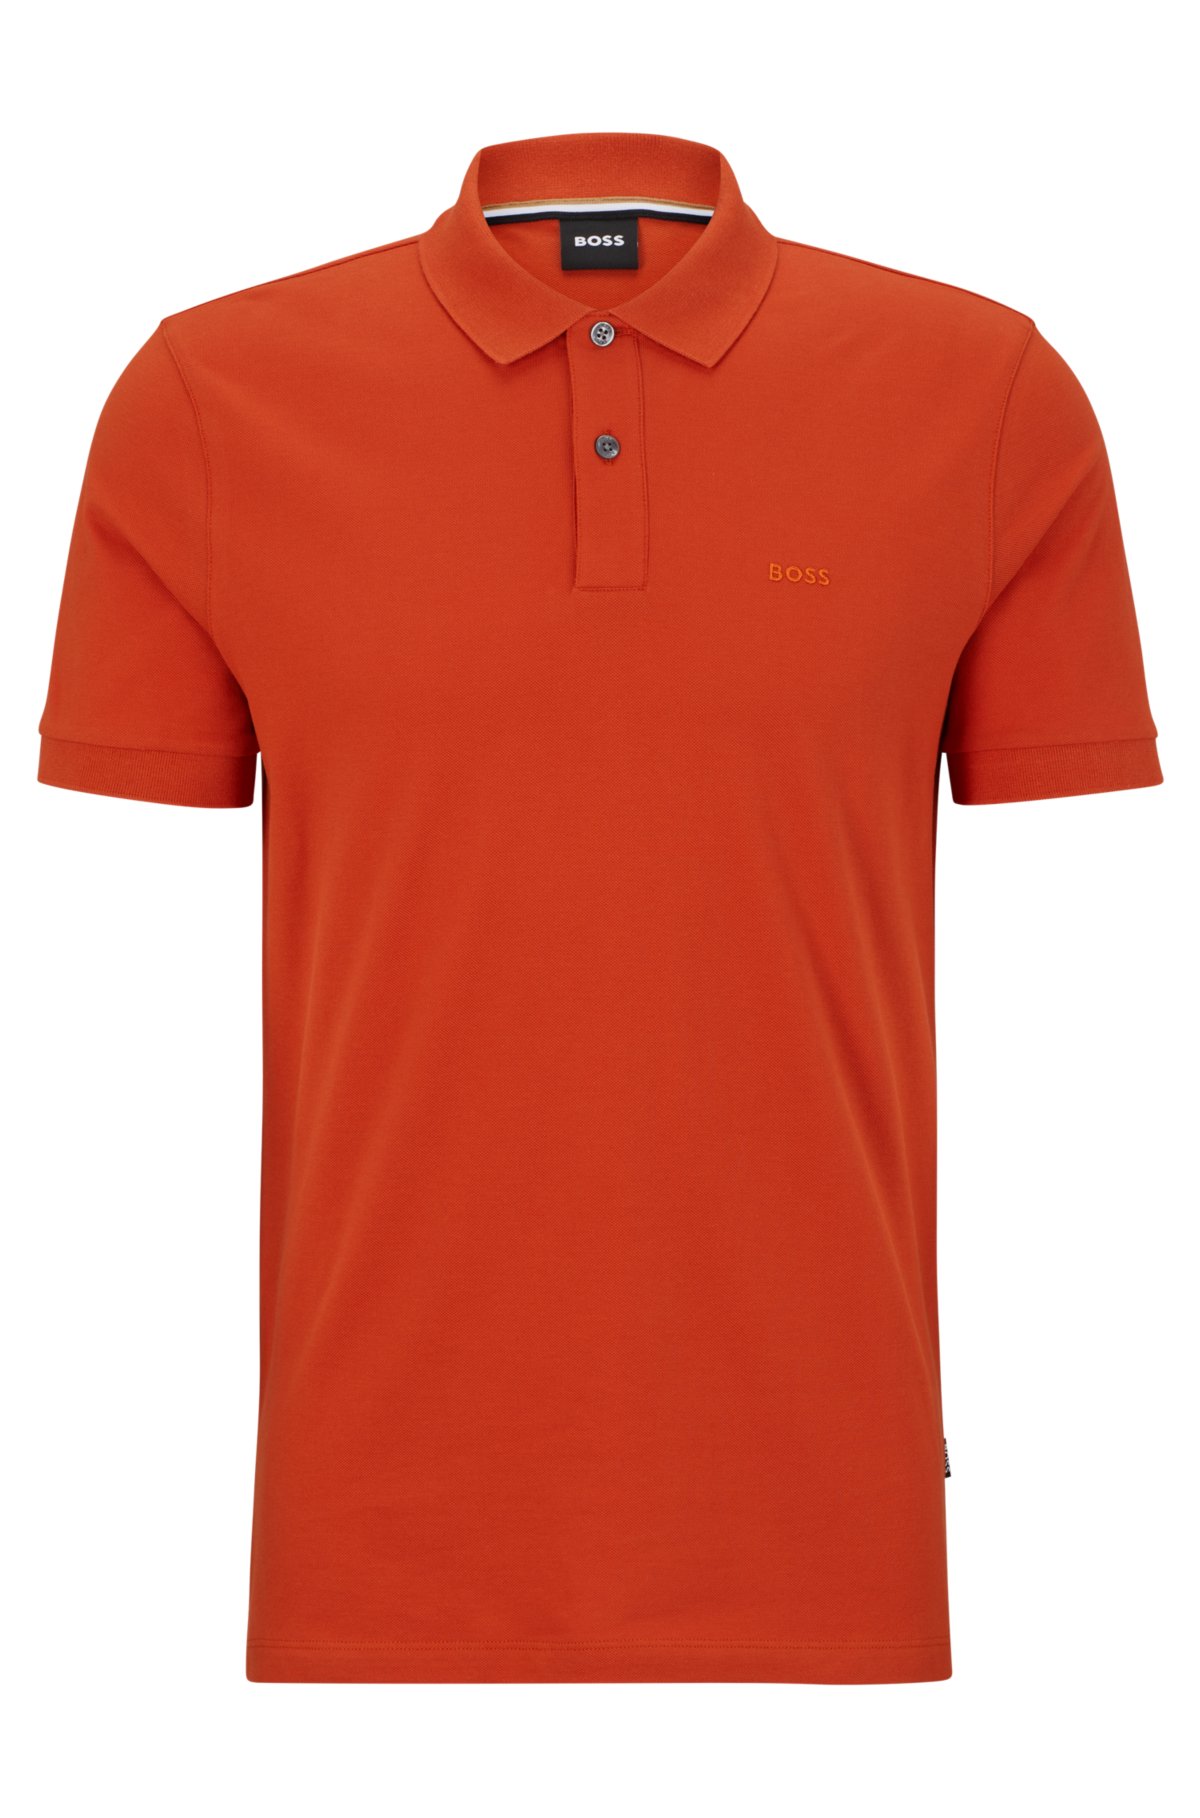 BOSS - Cotton with polo logo shirt embroidered